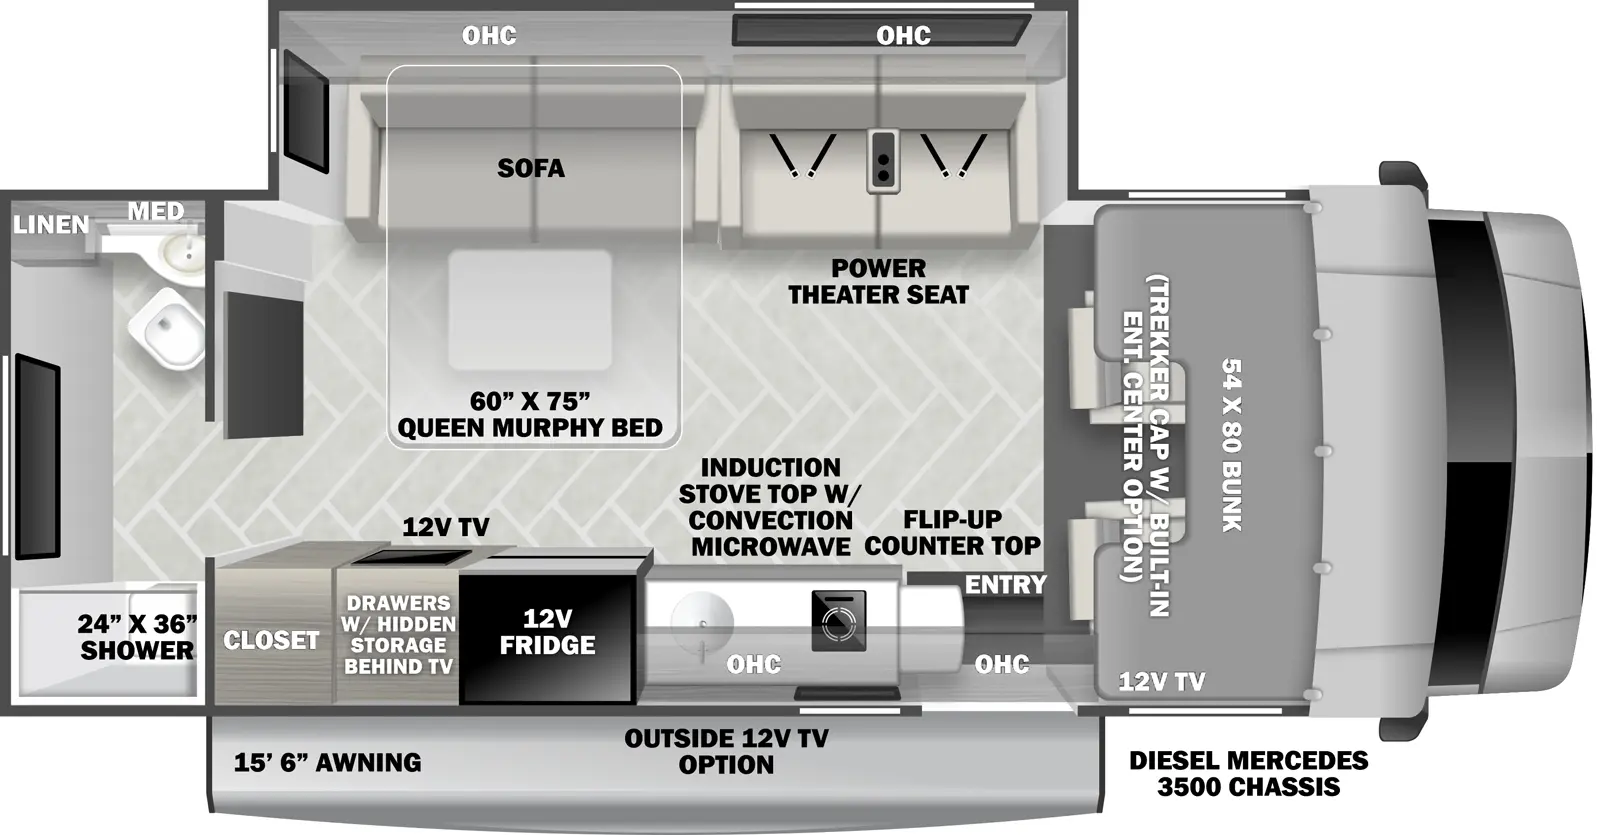 The 2401T is a class c with one slideout and one entry door. Exterior features a 15 foot 6 inch awning, and an optional 12 volt outside TV. Interior layout front to back: front cab with cab over bunk; off-door side slideout with power theater seating, queen murphy bed sofa, and overhead cabinets; door side entry, overhead cabinets, induction stove top with convection microwave, countertop with flip-up countertop extension, sink, 12 volt refrigerator, 12 volt TV with drawers and hidden storage behind, and closet; rear bathroom with linen cabinet. Optional Trekker cap with built-in entertainment center in place of cab over bunk.